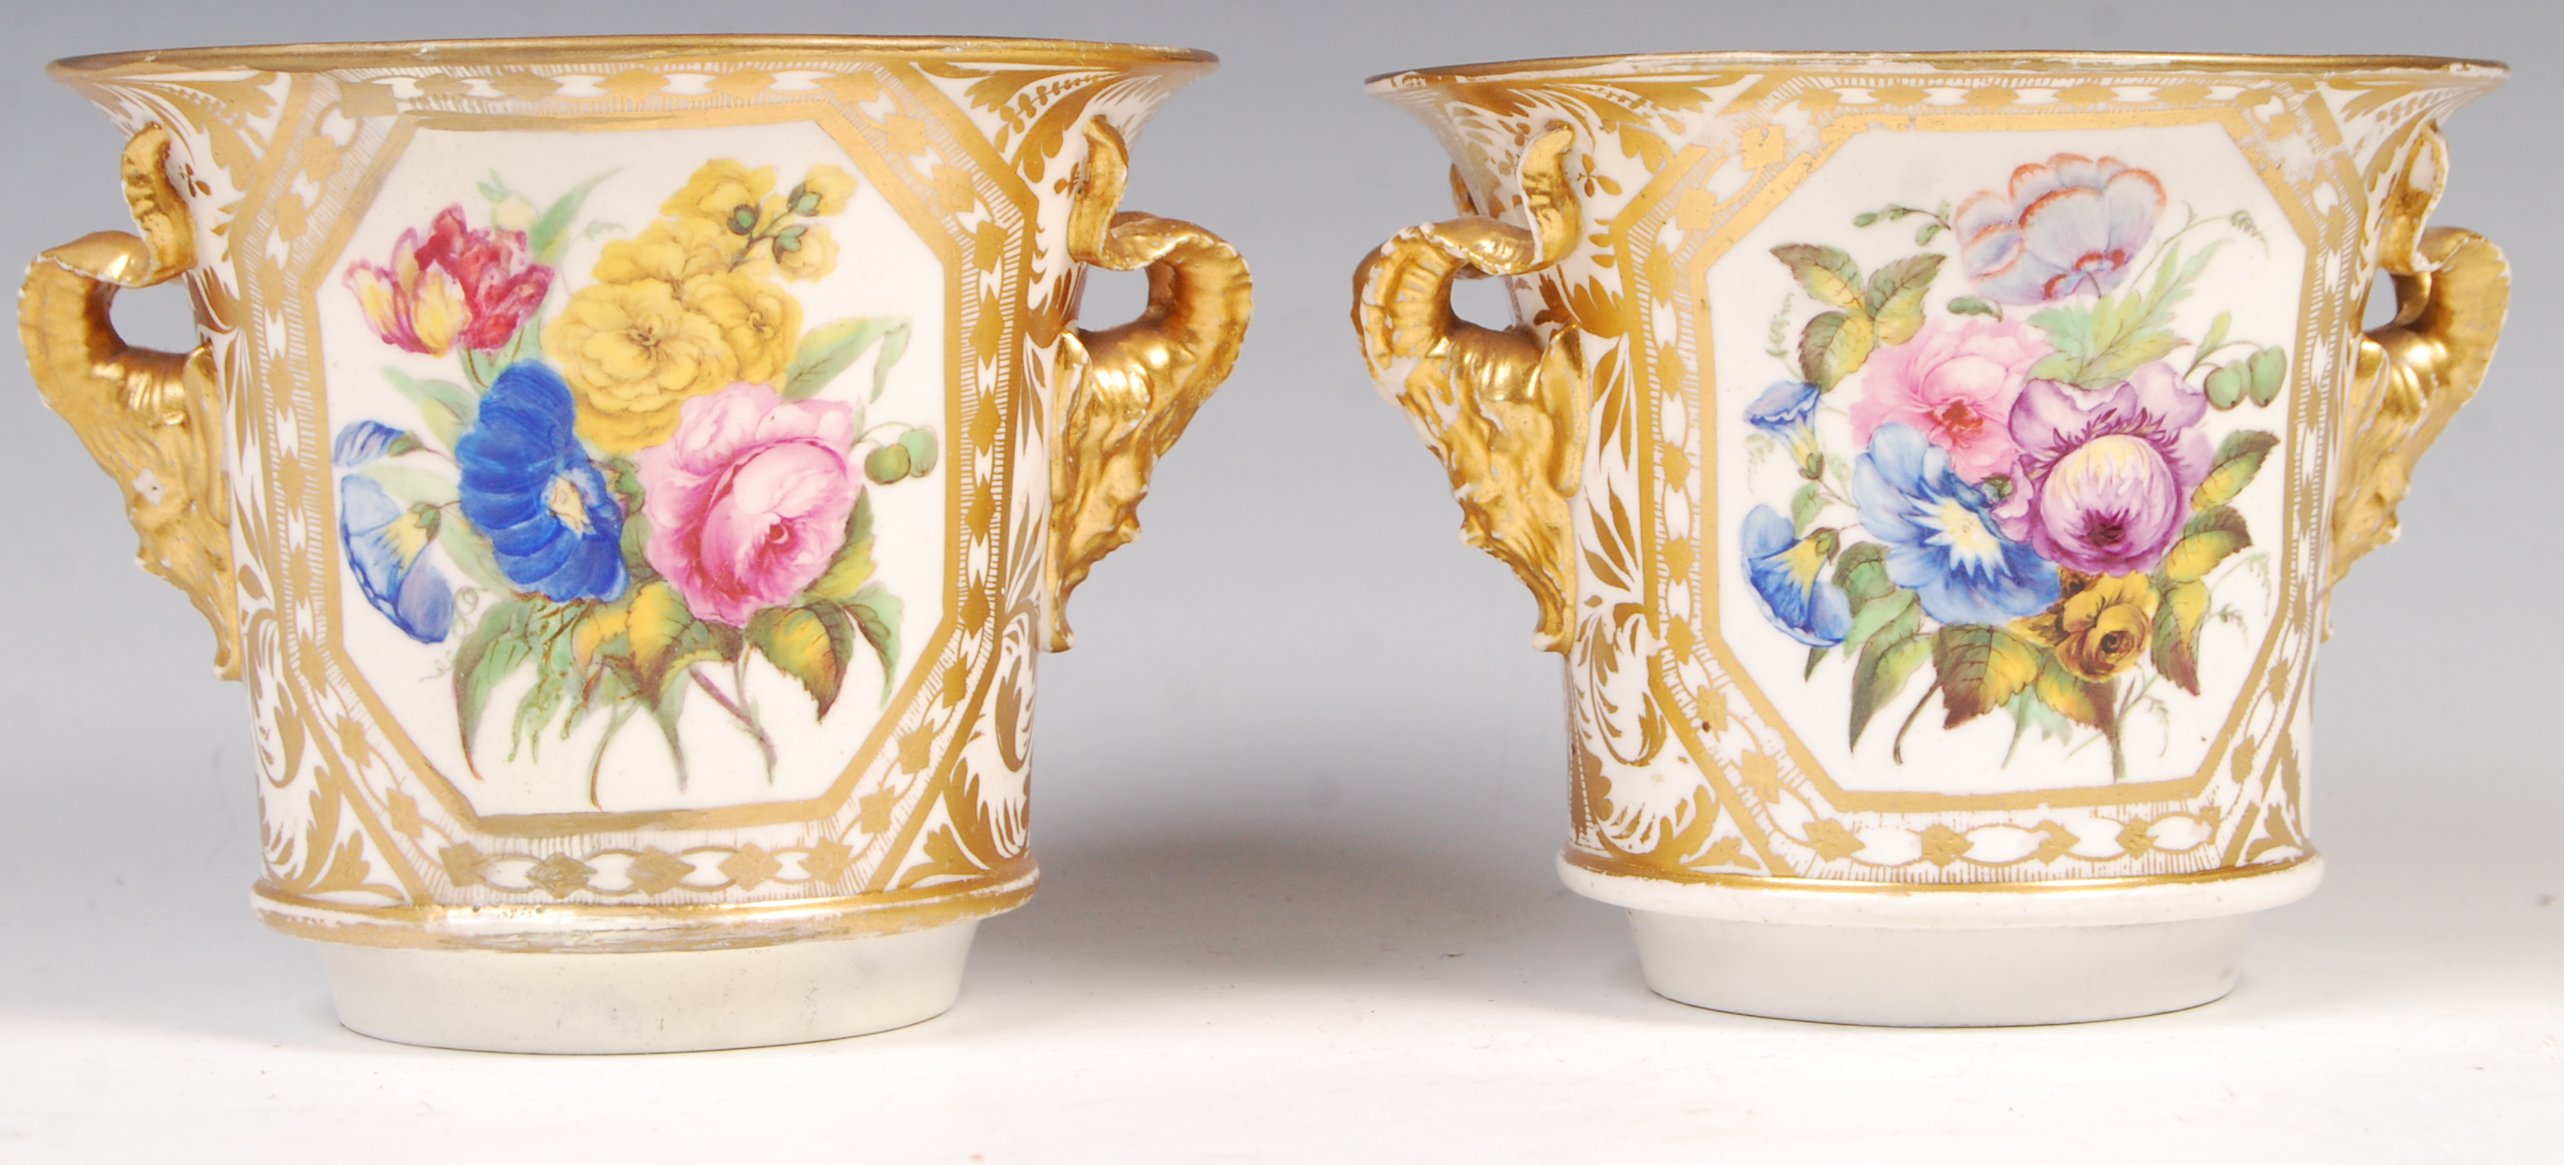 PAIR OF EARLY 19TH CENTURY DERBY FLOWER BOUGHS